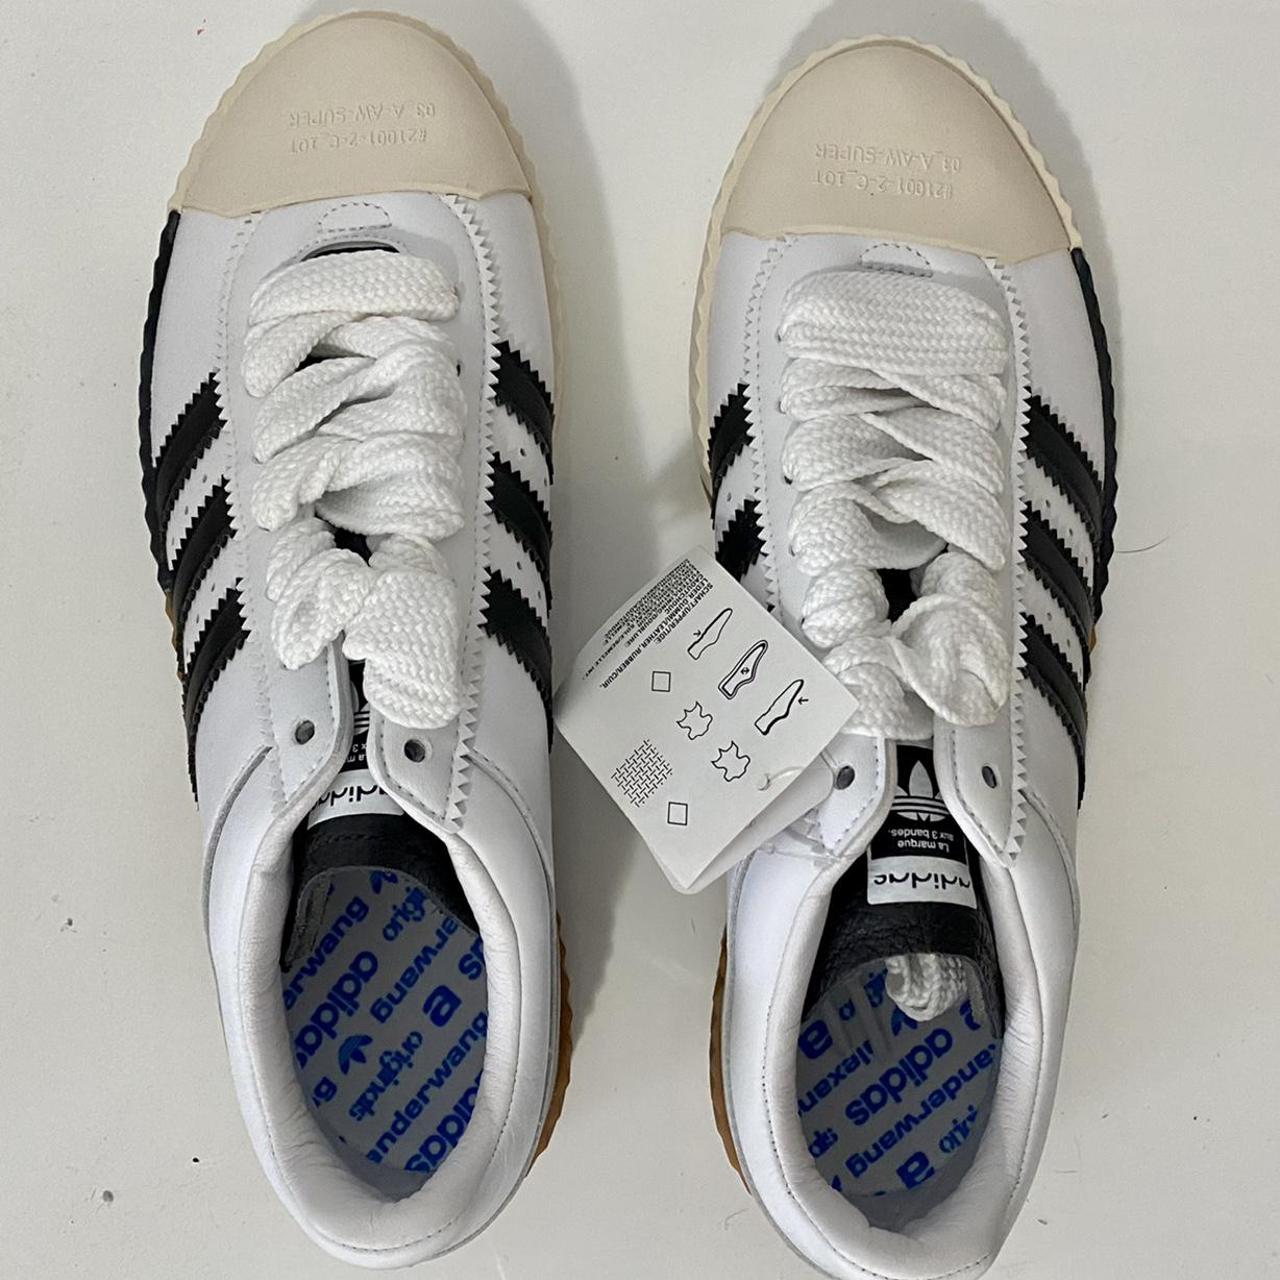 Alexander Wang Men's White and Cream Trainers (3)